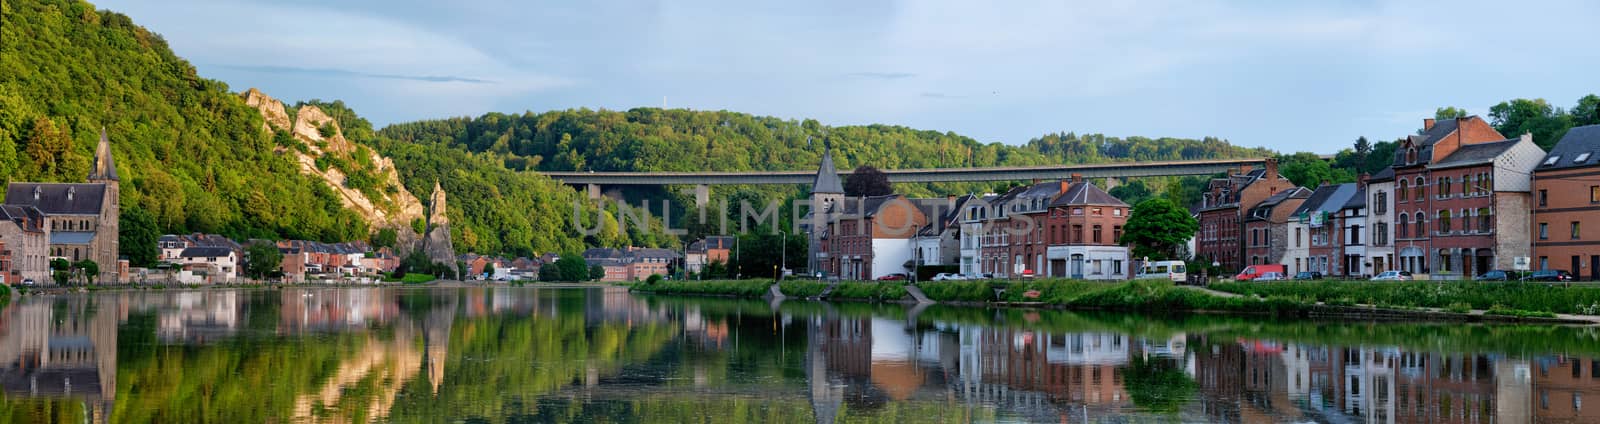 View of picturesque Dinant city over the Meuse river Dinant is a Walloon city and municipality located on the River Meuse, in the Belgian province of Namur on sunset with Bayard Rock and highway